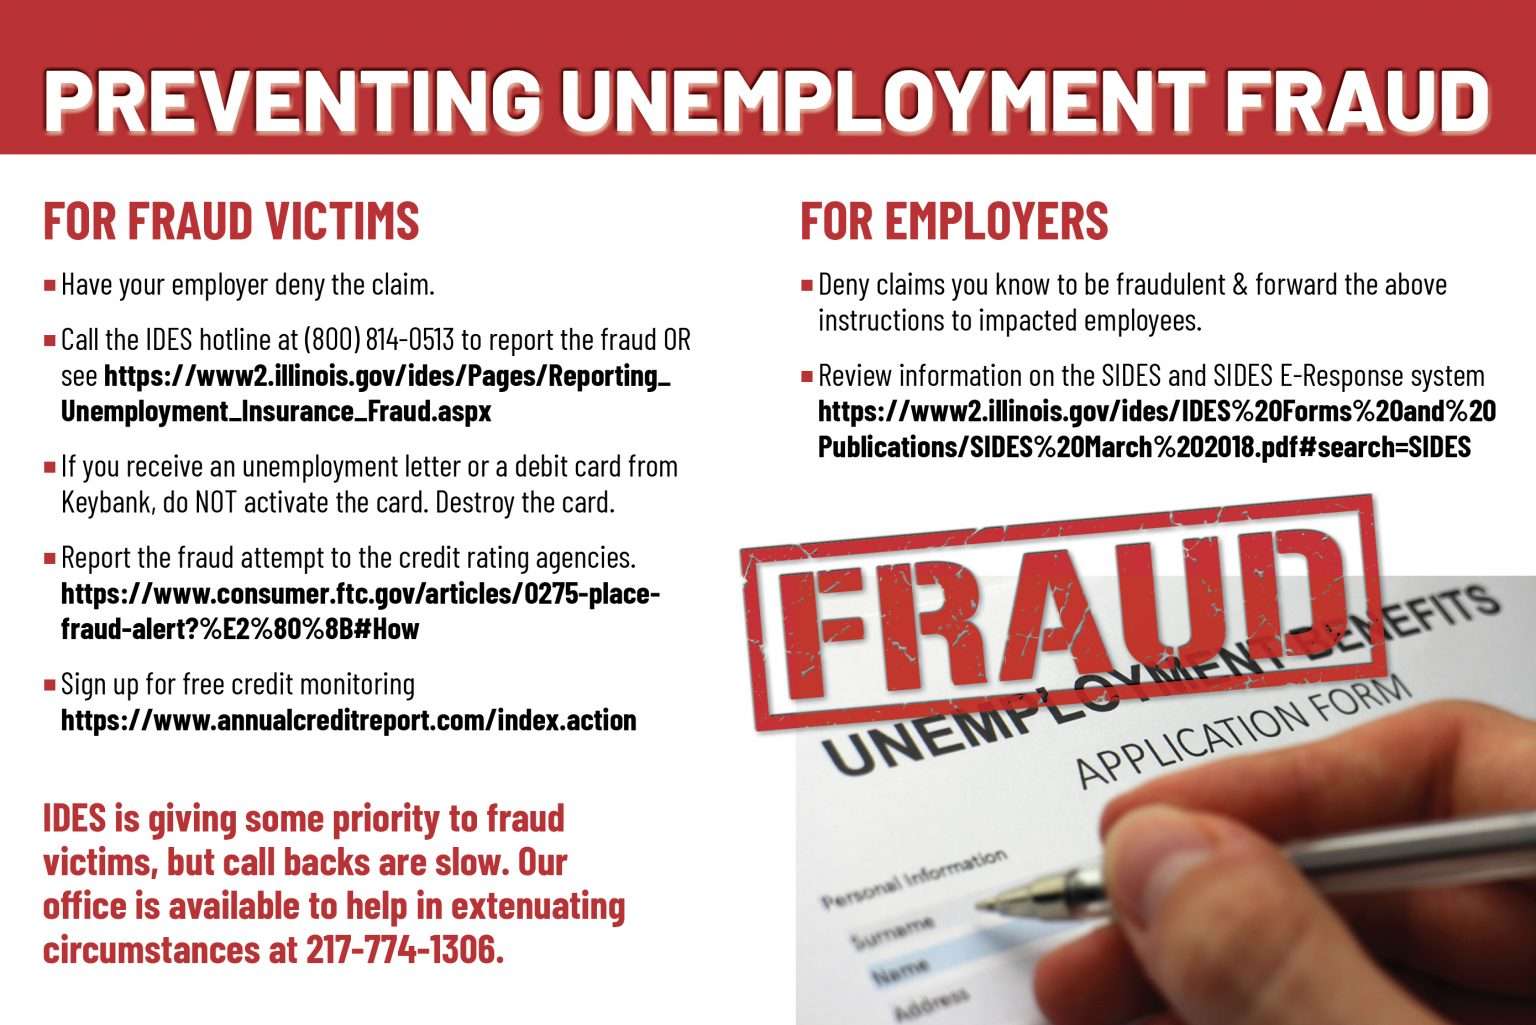 A Resource Guide for Suspected Unemployment Fraud